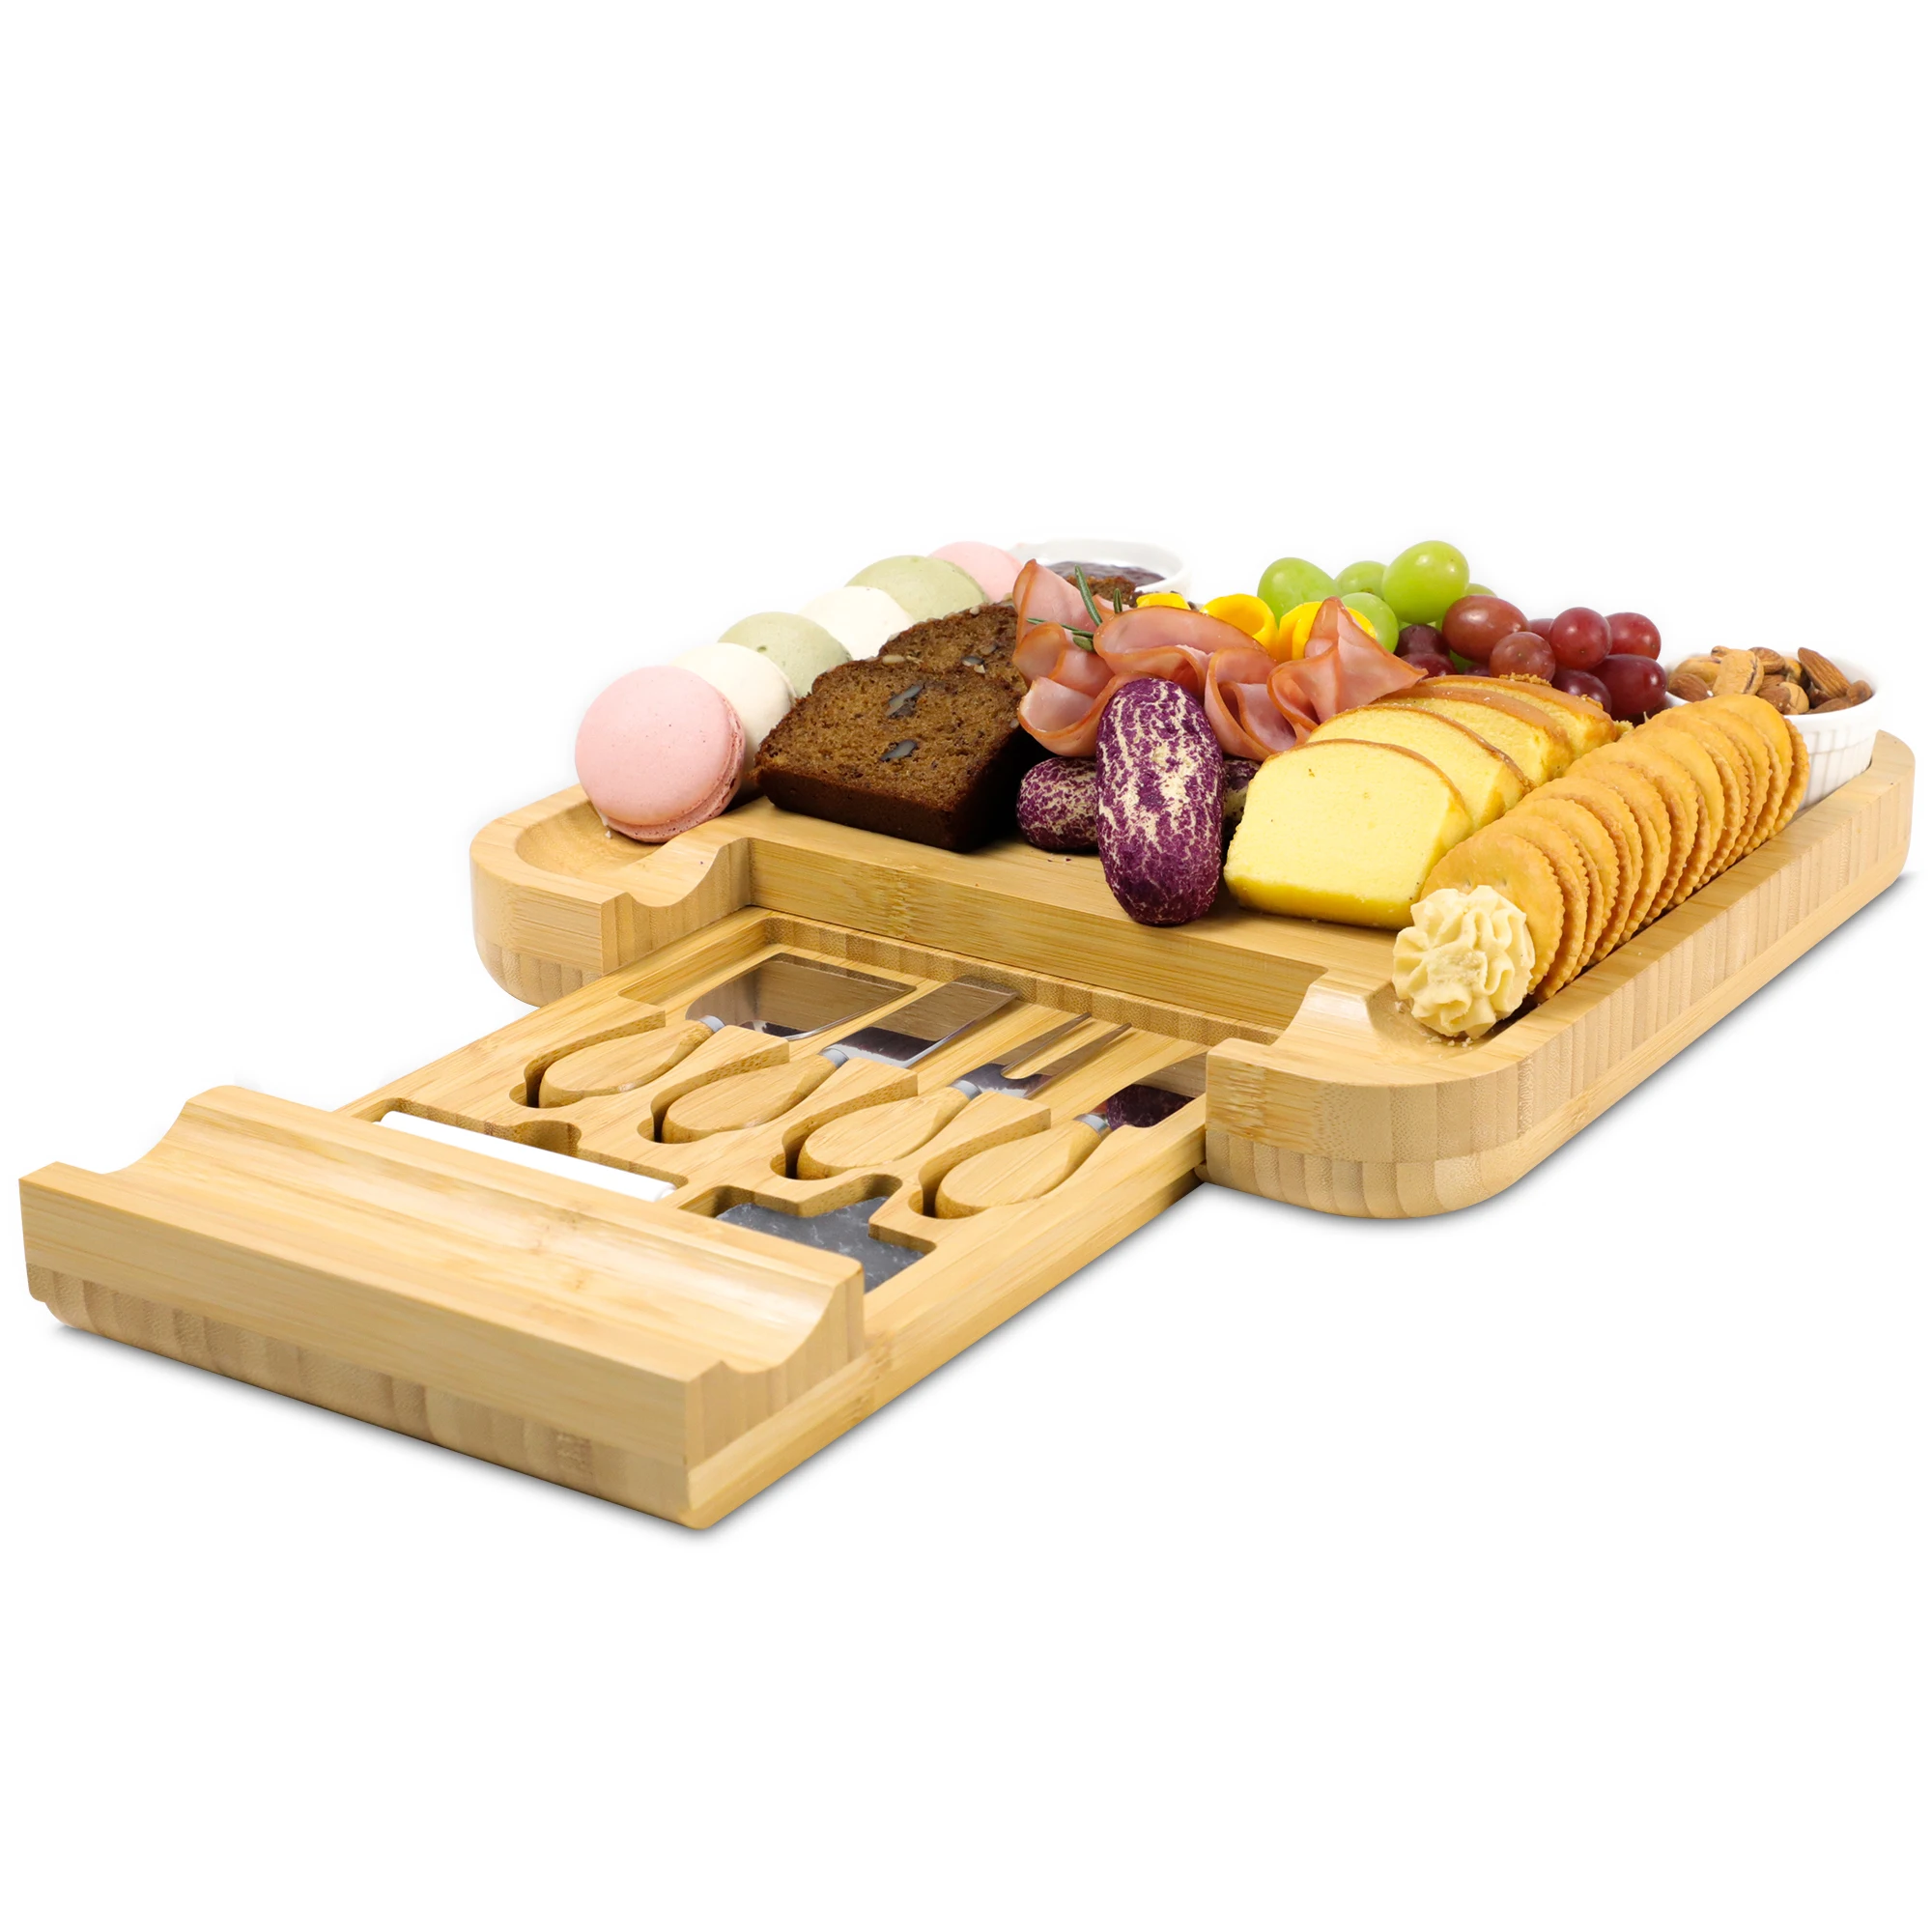 

Bamboo Cutting Board Knife Set Charcuterie Meat Platter Serving Cheese Board With Cheese Knifes